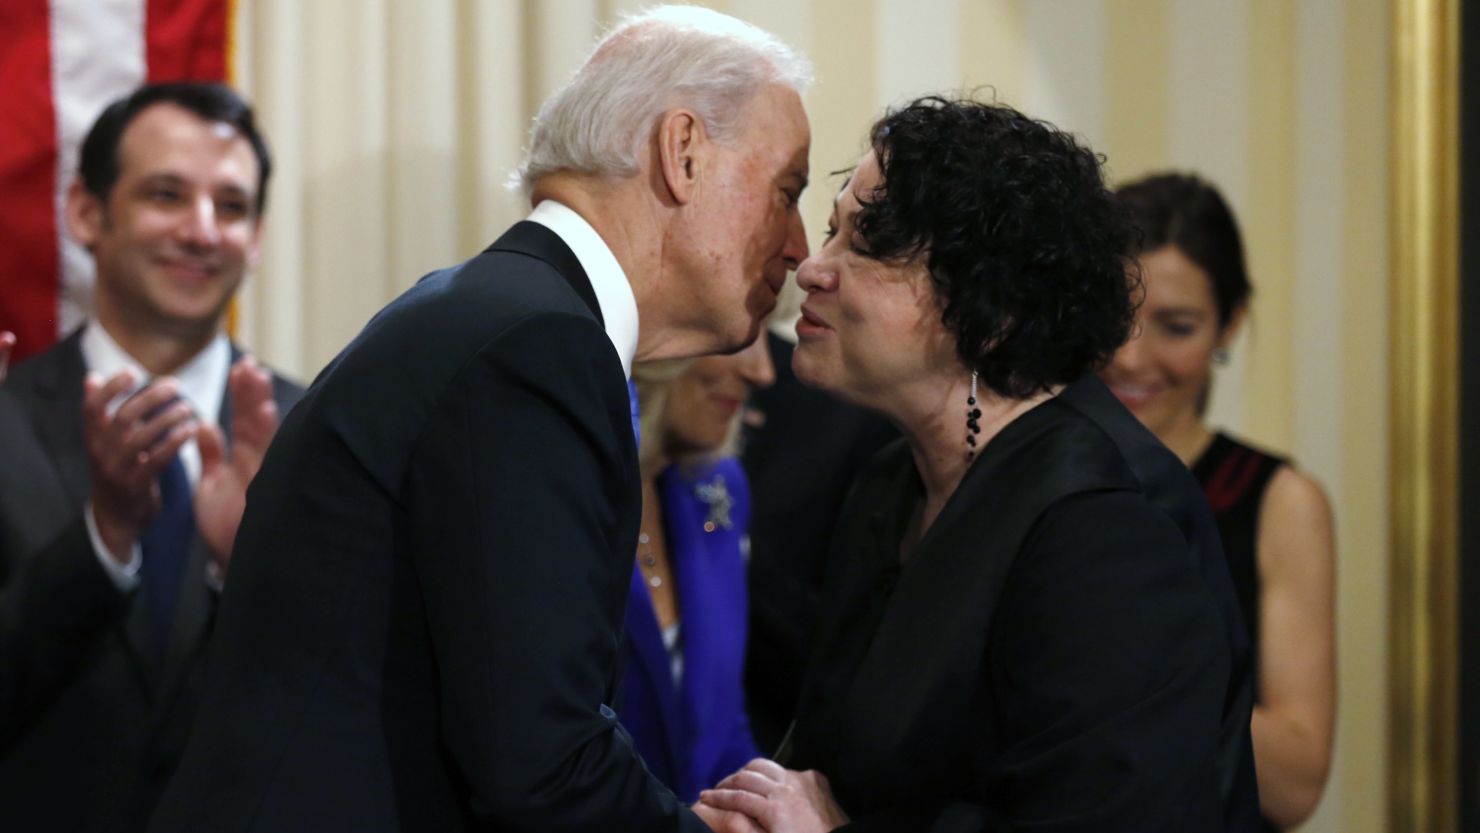 Vice President Joe Biden kisses Supreme Court Justice Sonia Sotomayor after she administered the oath of office to him Sunday.